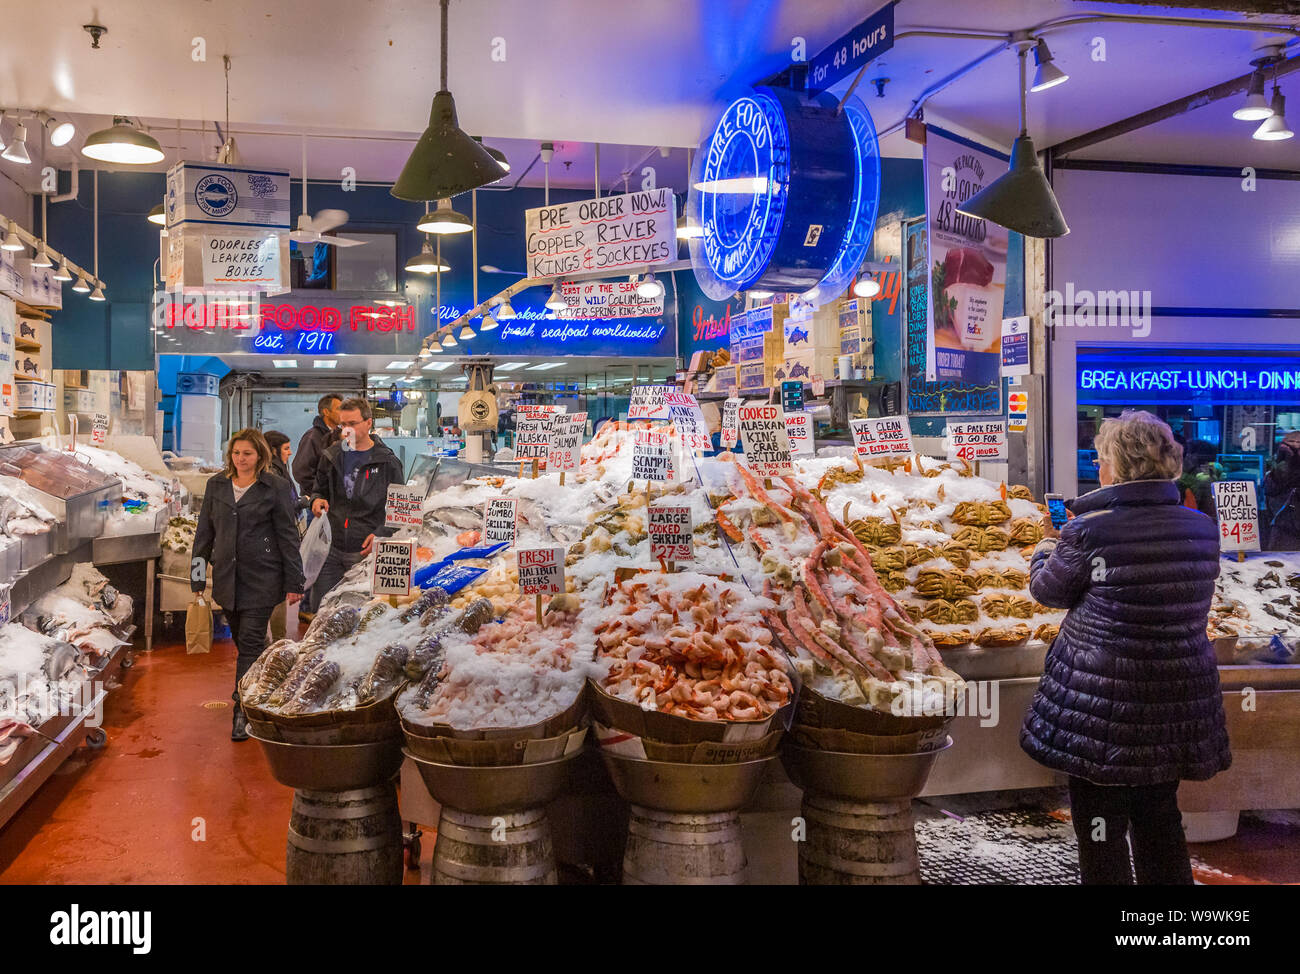 A view inside the famous Pike Place Market in Seattle, Washington, USA Stock Photo